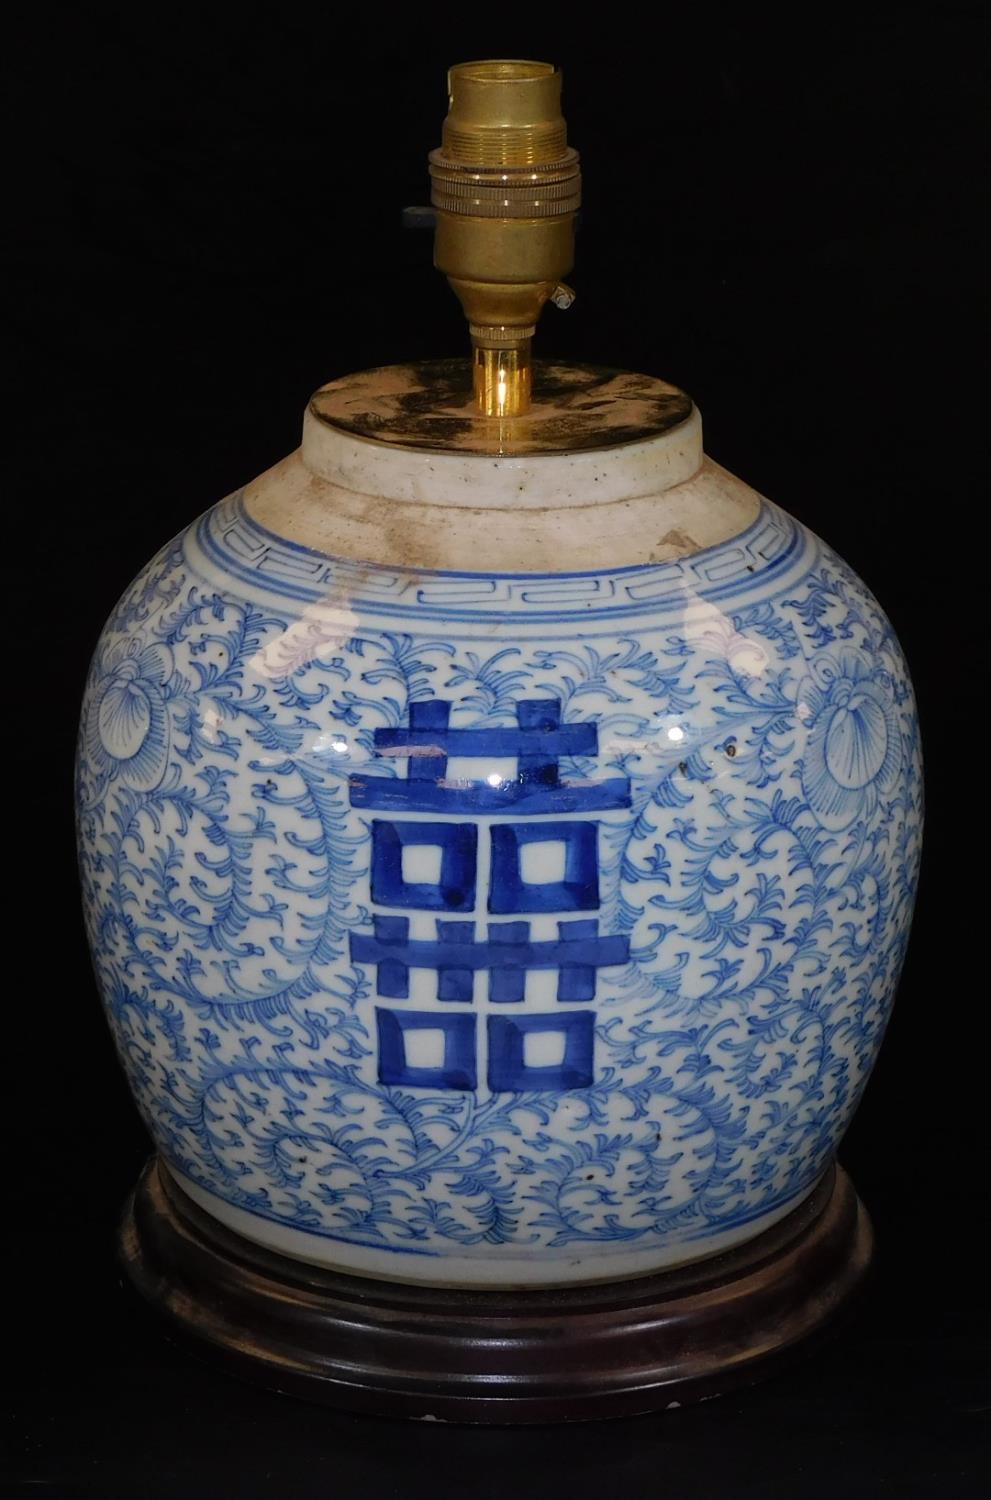 A Chinese blue and white porcelain ginger jar converted to a lamp, with scrolling lotus foliage